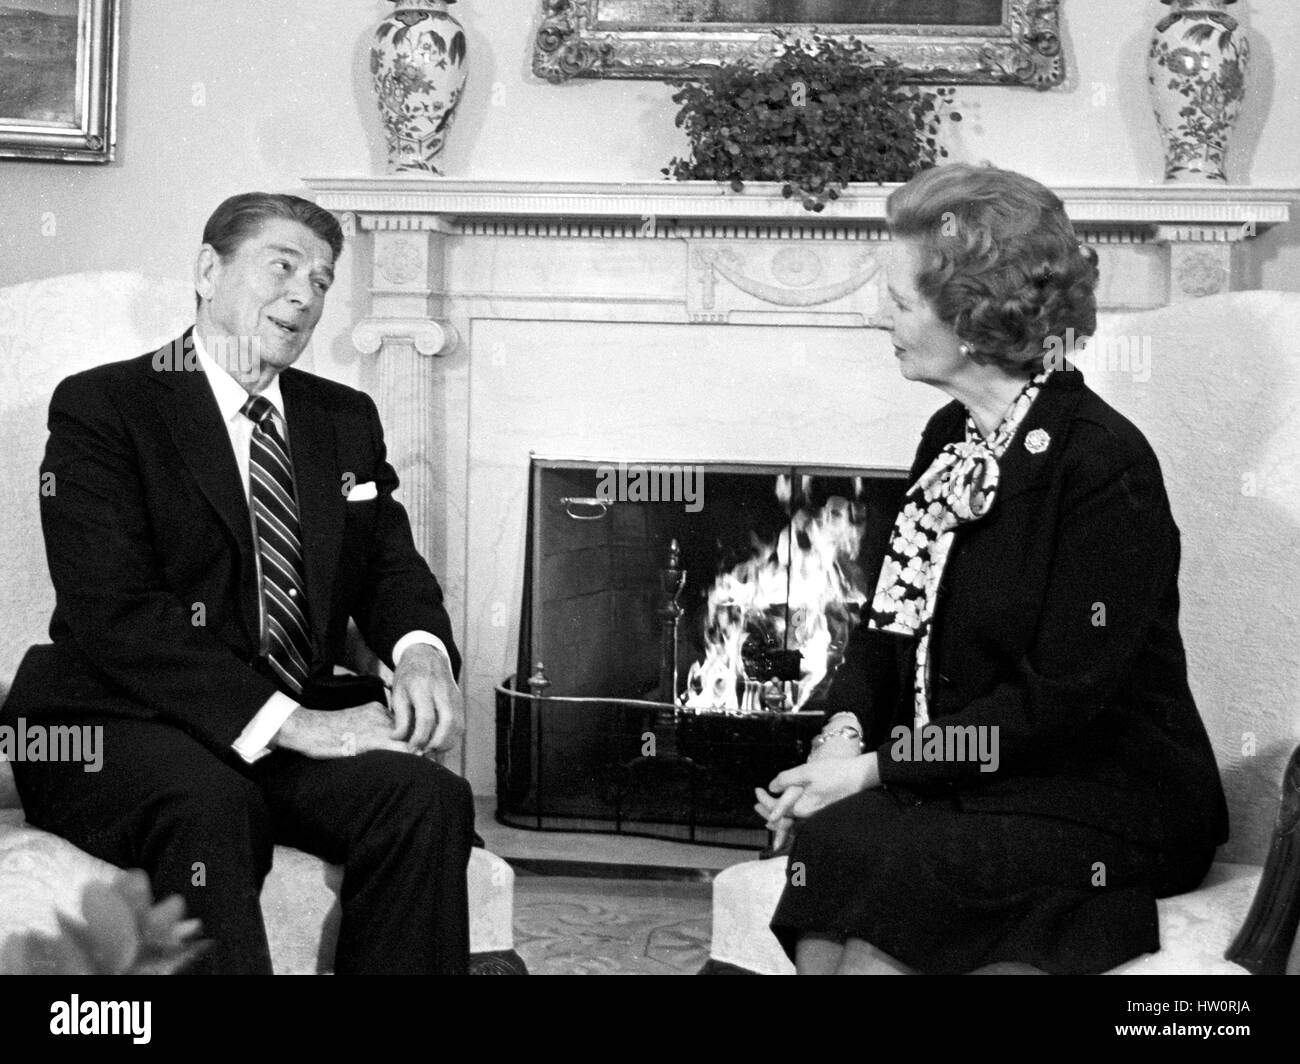 United States President Ronald Reagan and Prime Minister Margaret Thatcher of Great Britain meet in the Oval Office of the White House in Washington, D.C on Wednesday, February 20, 1985 Their meeting lasted 2 hours Thatcher died from a stroke at 87 on Monday, April 8, 2013.. Stock Photo